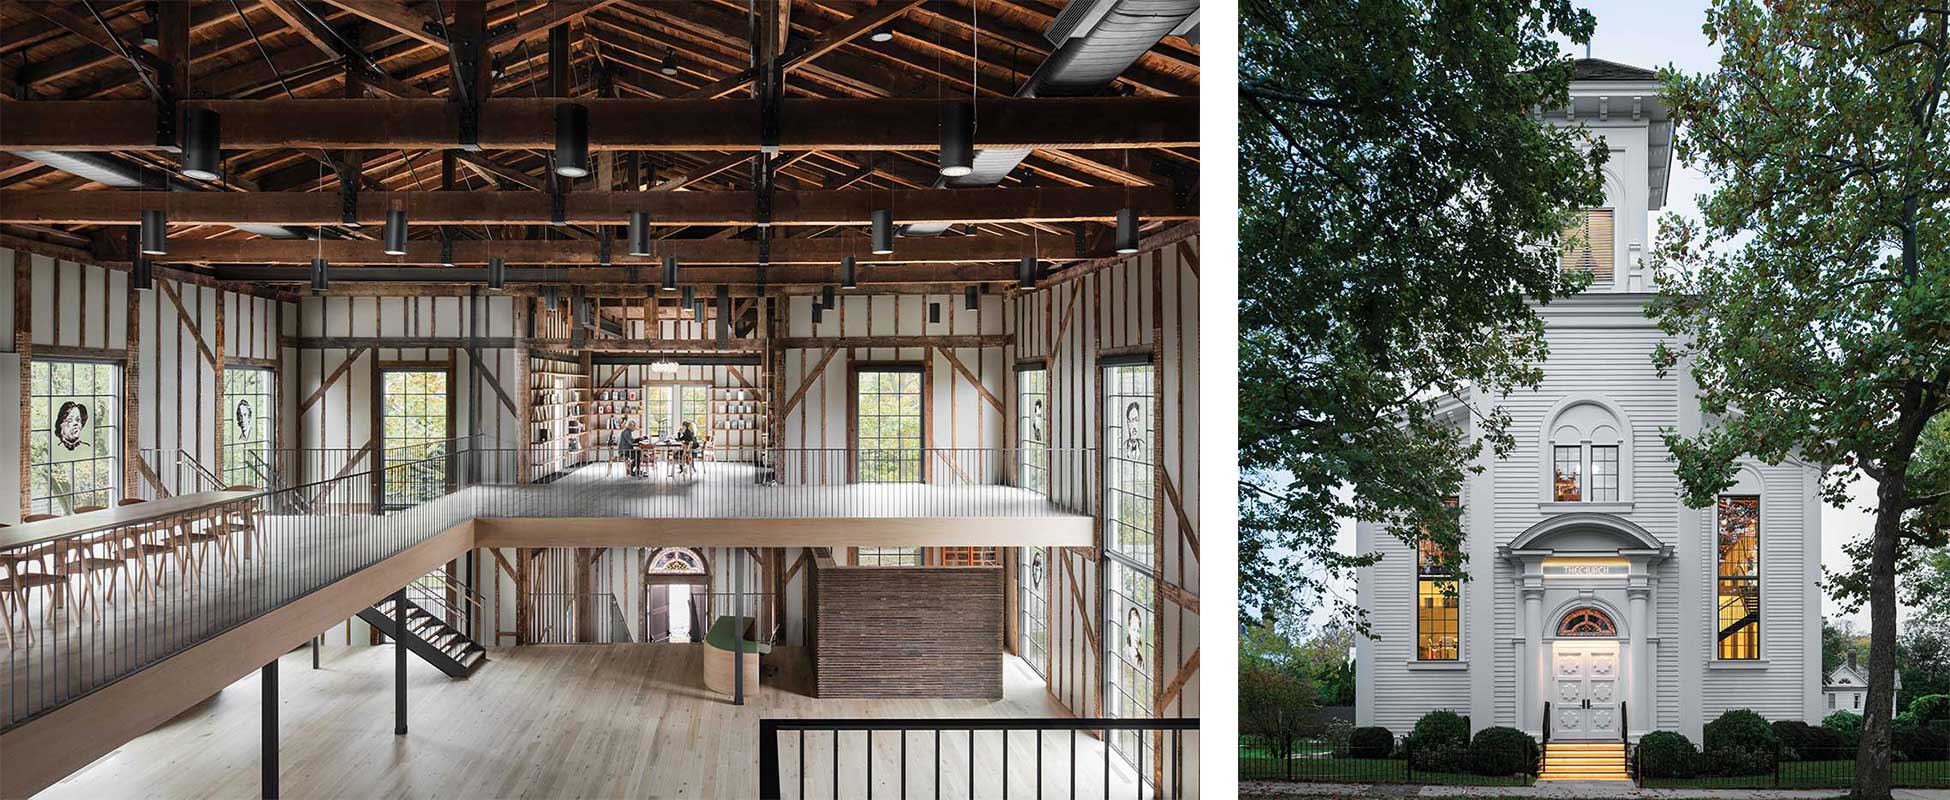 Exterior and Interior of The Church in Sag Harbor, an adaptive reuse project, featuring Marvin windows, given new life as a center for the arts.